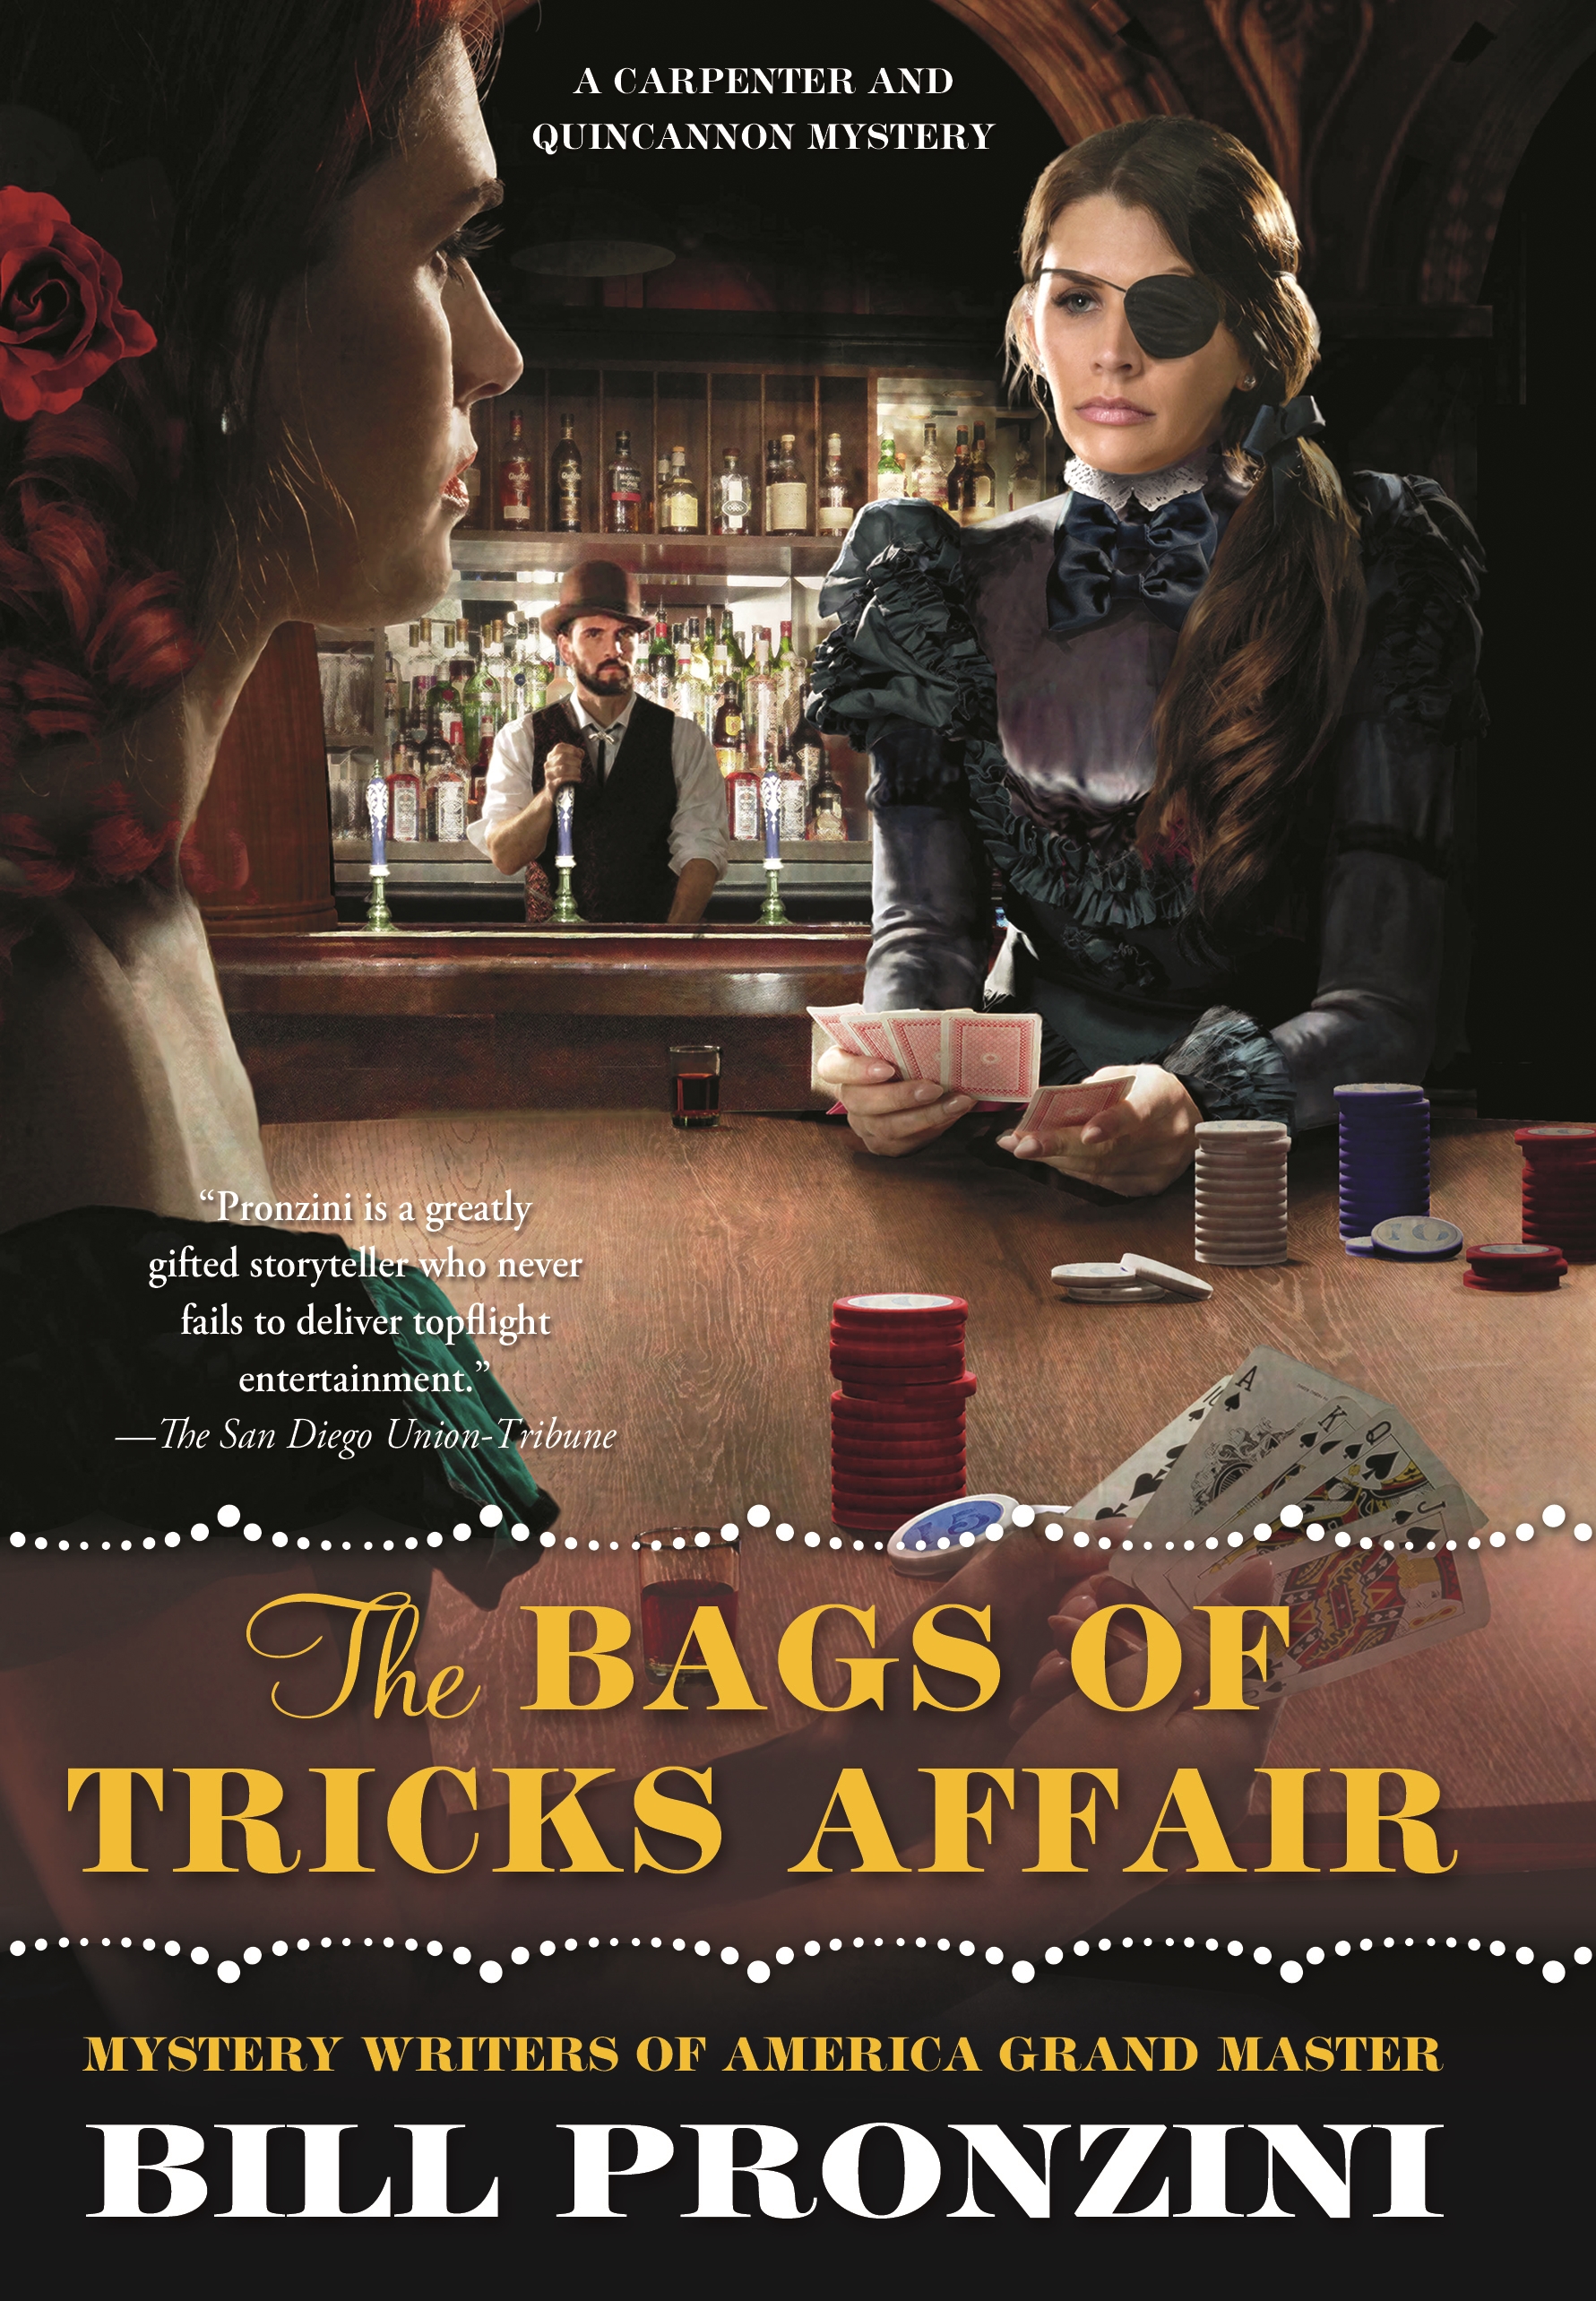 The Bags of Tricks Affair : A Carpenter and Quincannon Mystery by Bill Pronzini